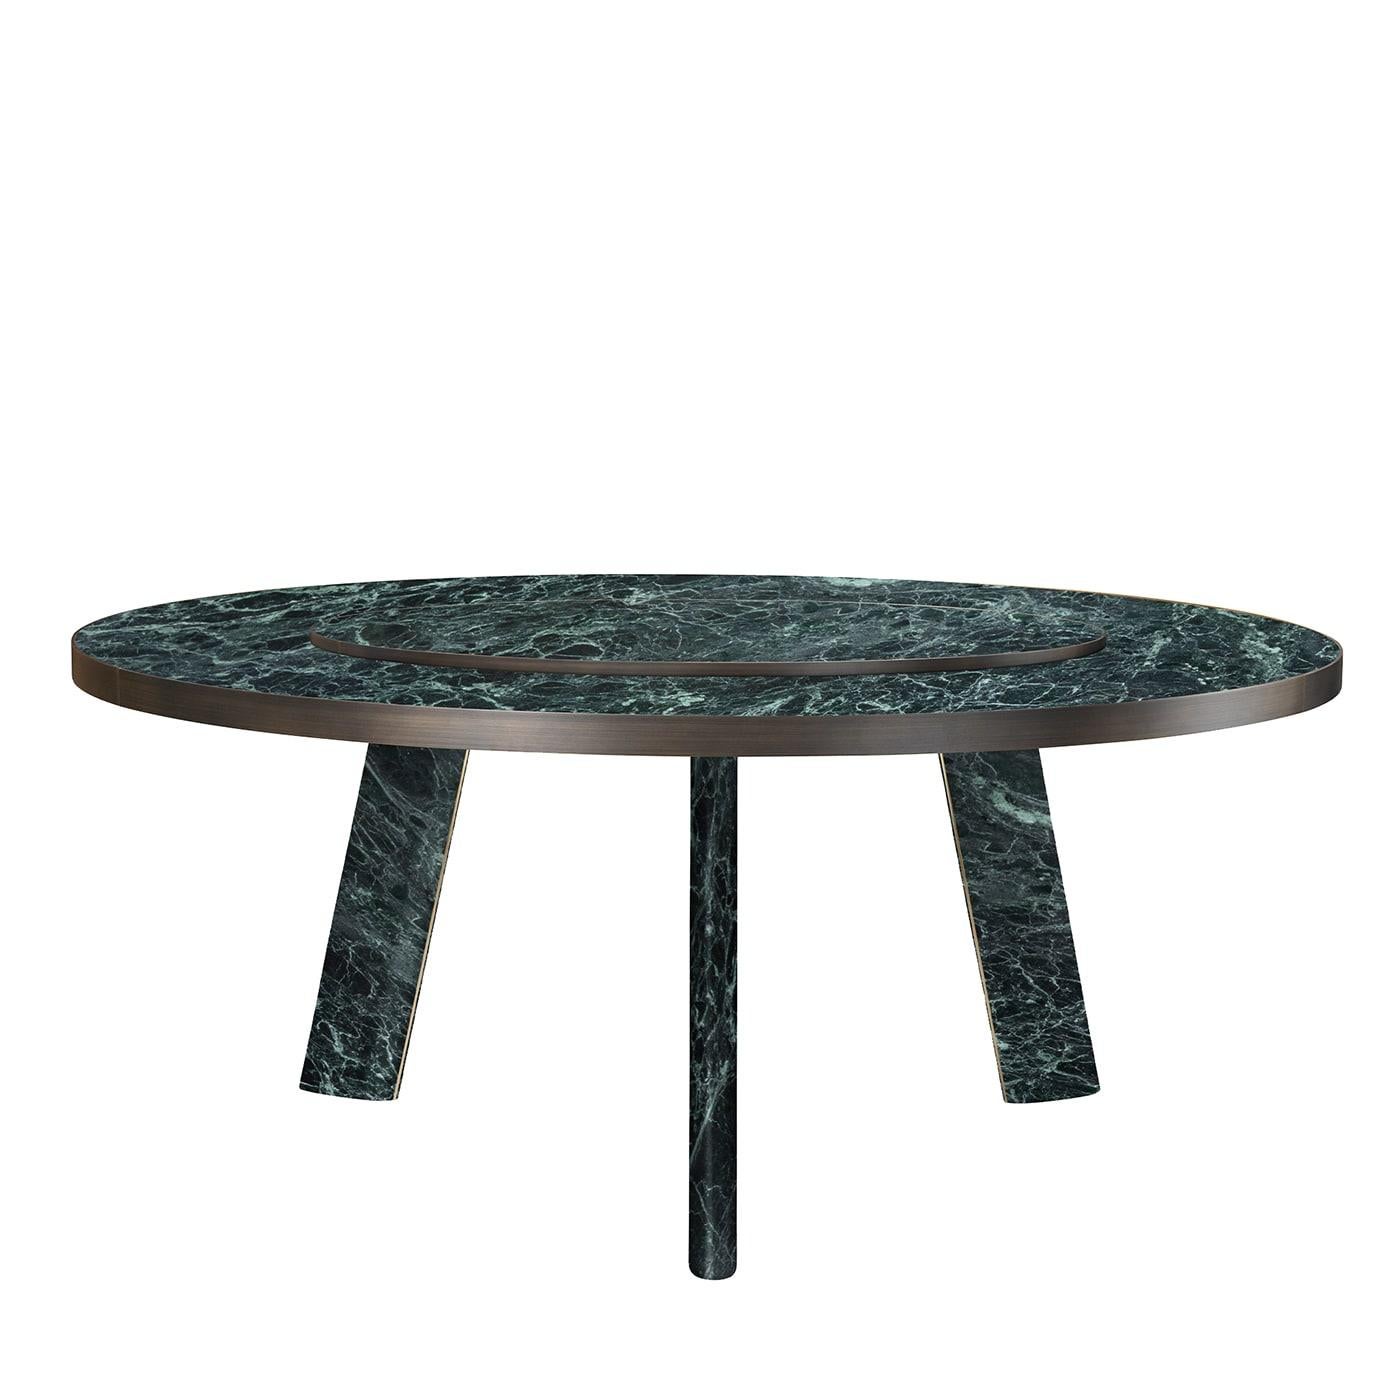 Native Verde Alpi Round Dining Table by Stefano Giovannoni For Sale